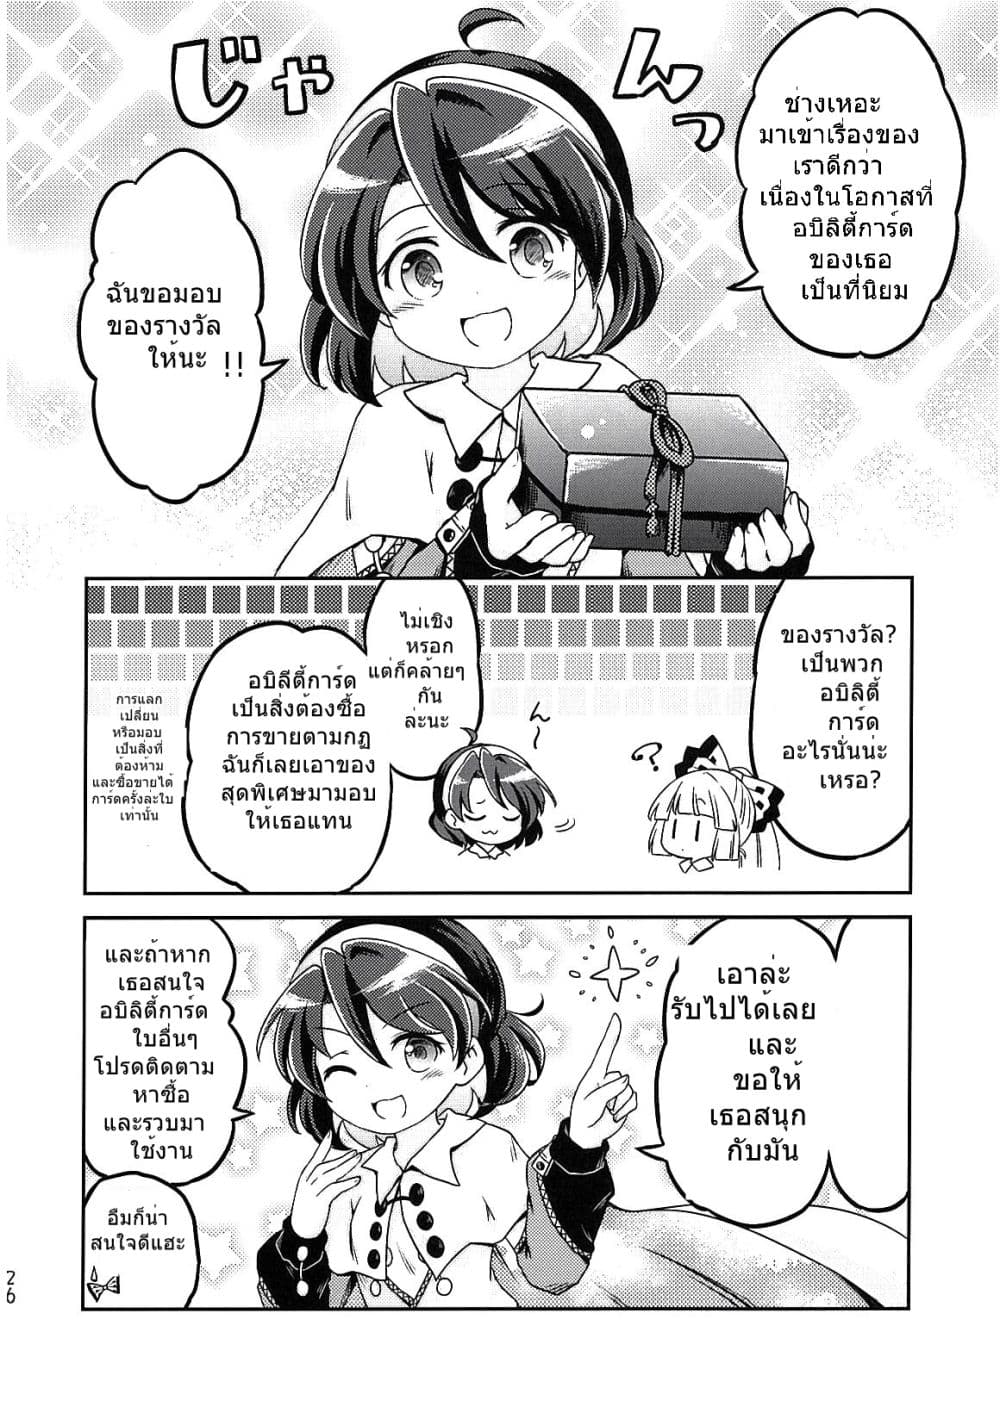 Touhou Project Chima Book By Pote ตอนที่ 2 (26)